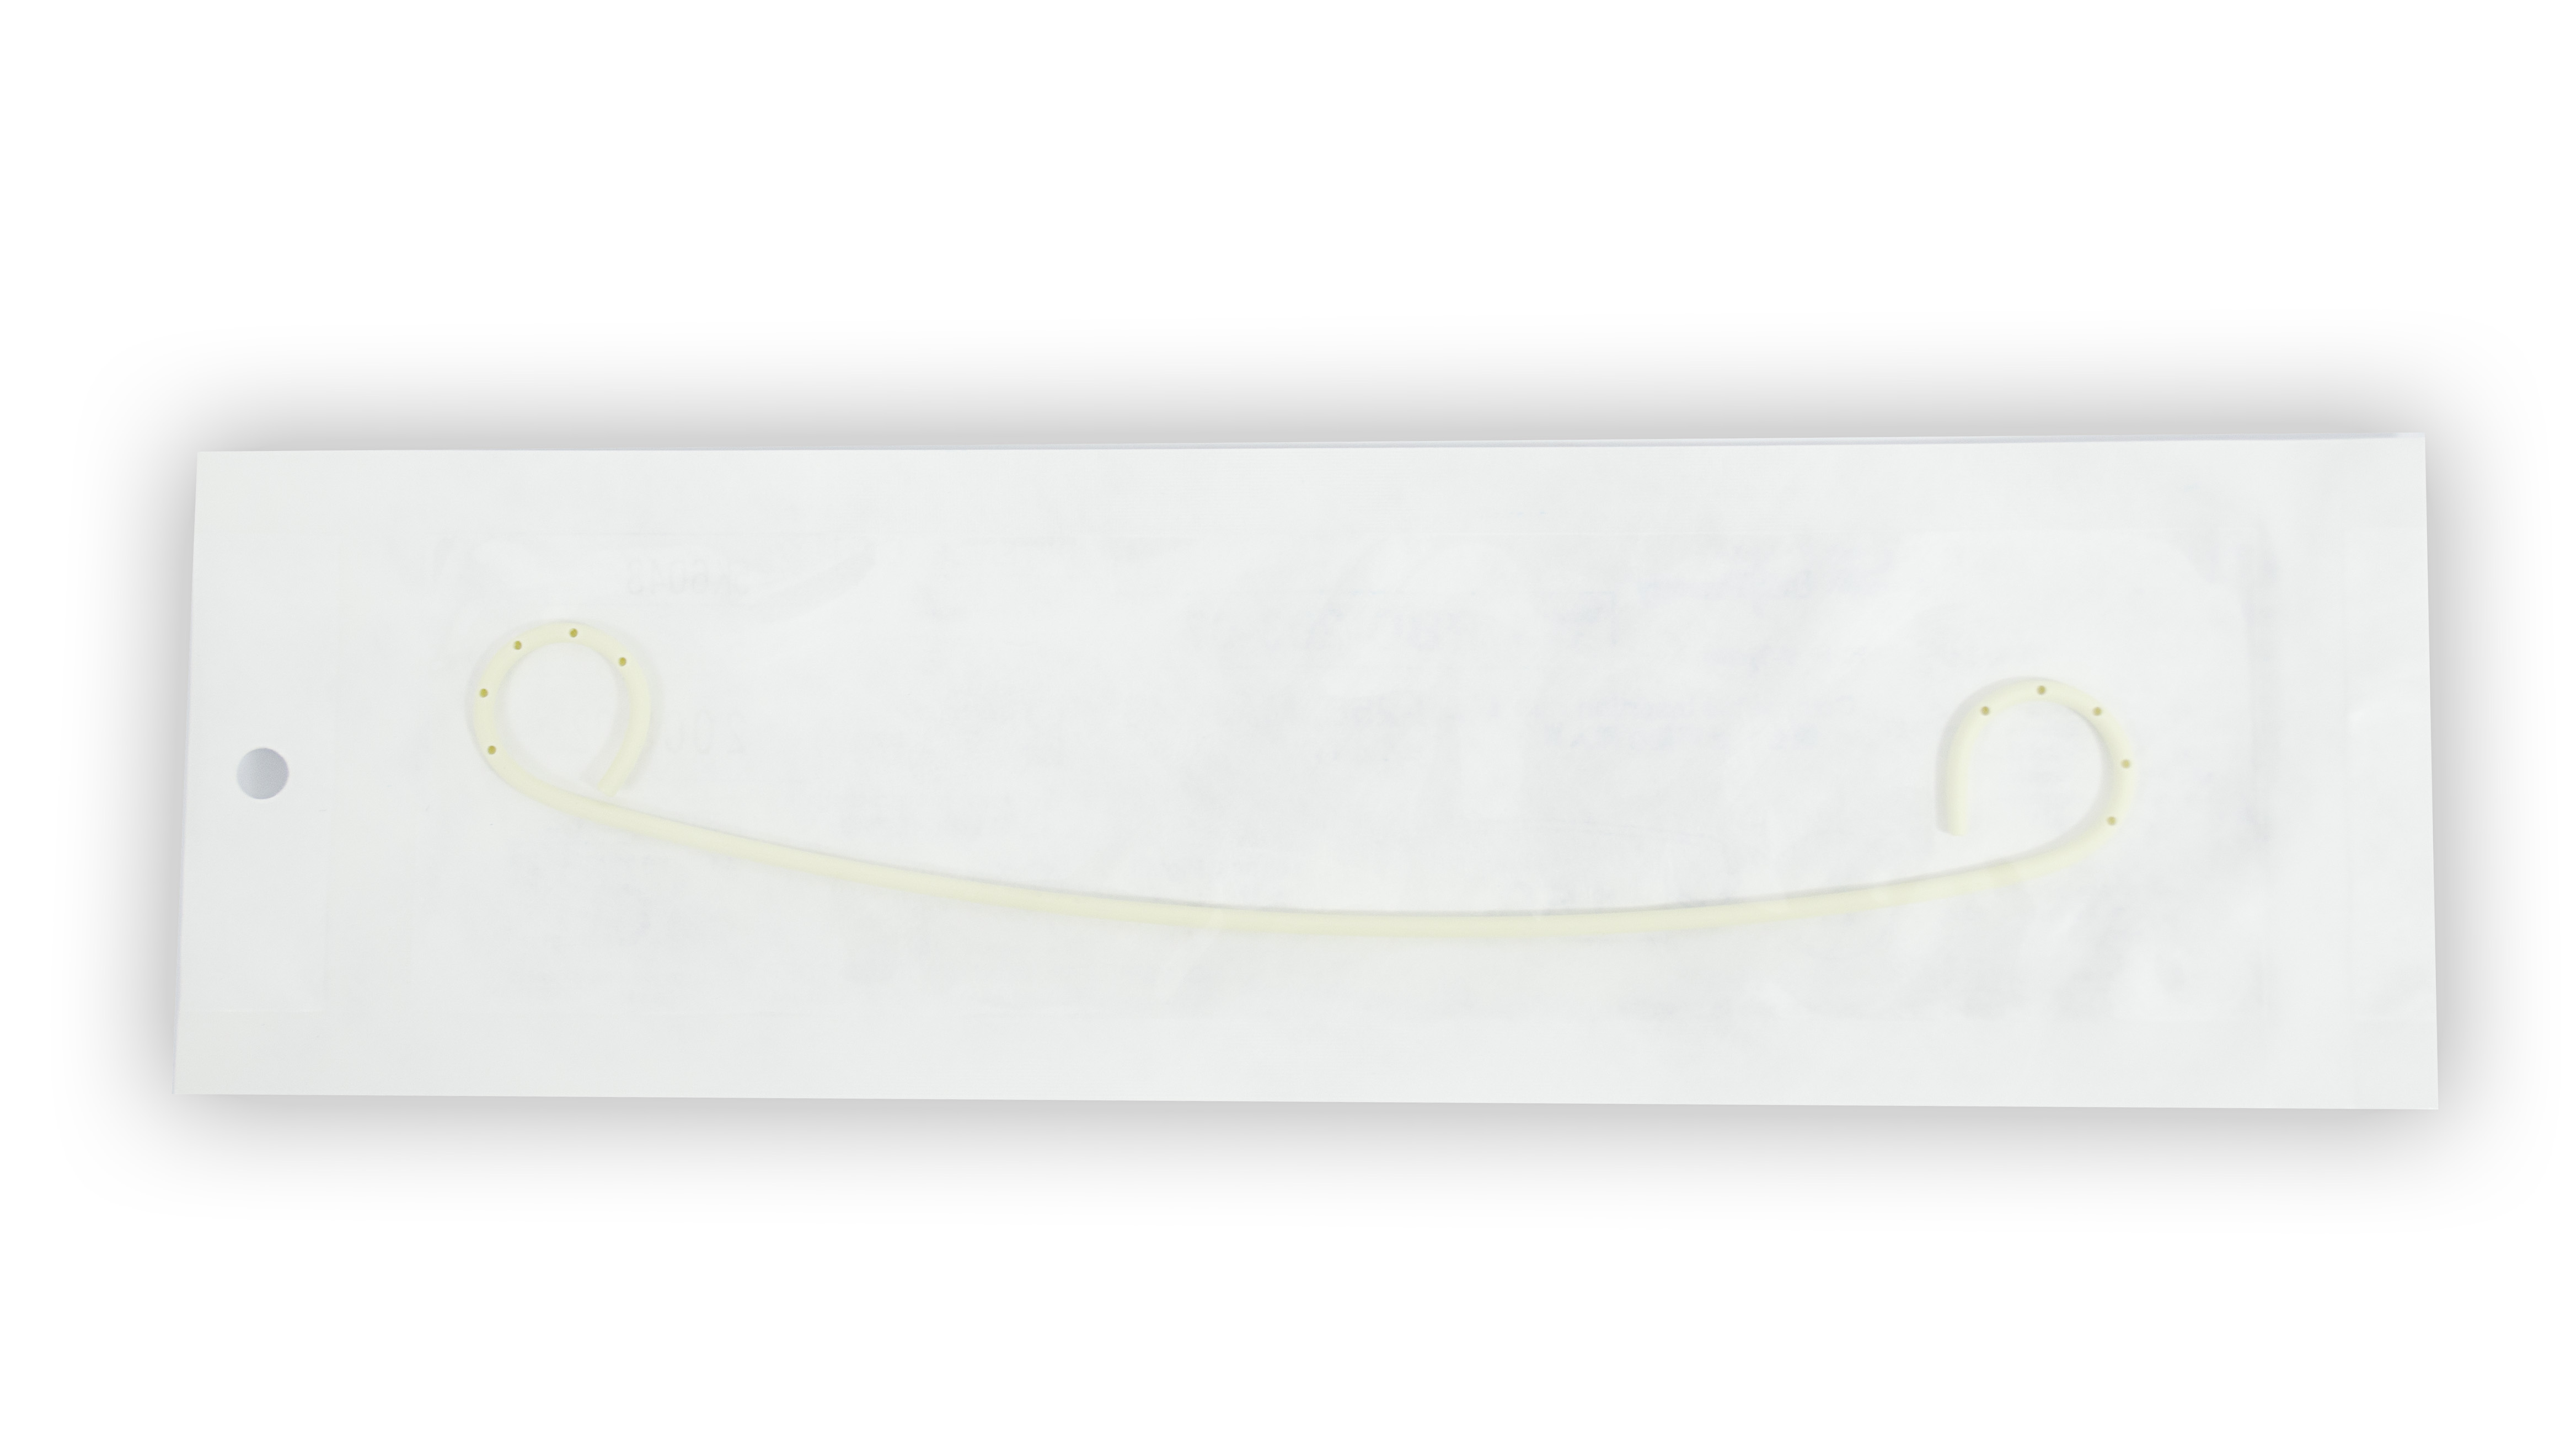 [Out-of-Date] Olympus Disposable Biliary Drainage Tube - PBD-203-0715